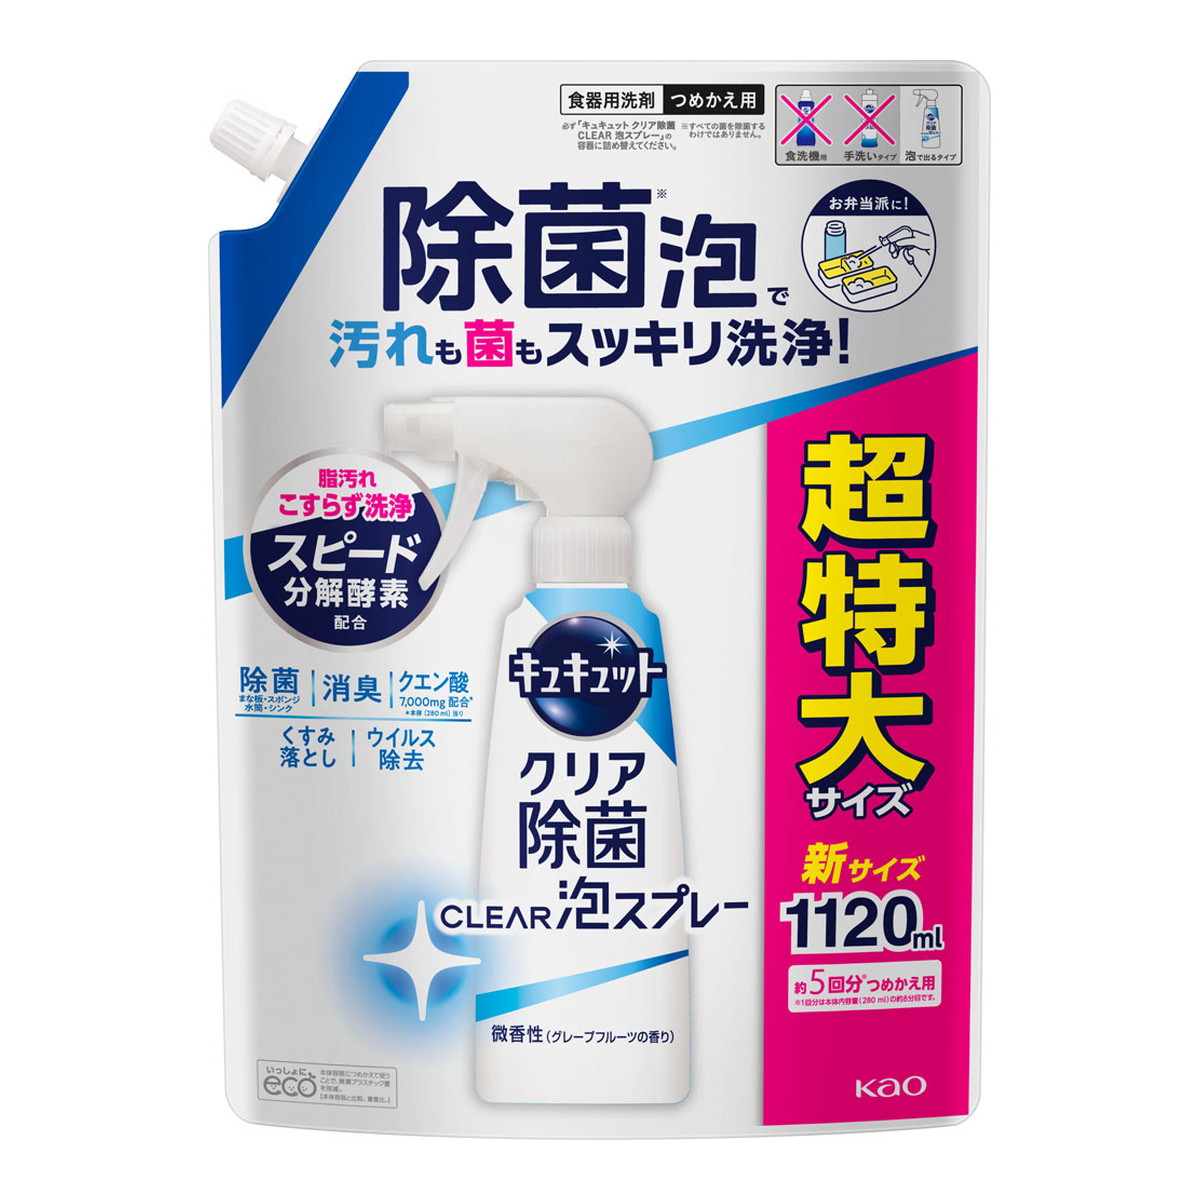 Kao キュキュット クリア除菌 CLEAR泡スプレー 微香性 詰替用 1120ml ×4 キュキュット 台所用洗剤の商品画像